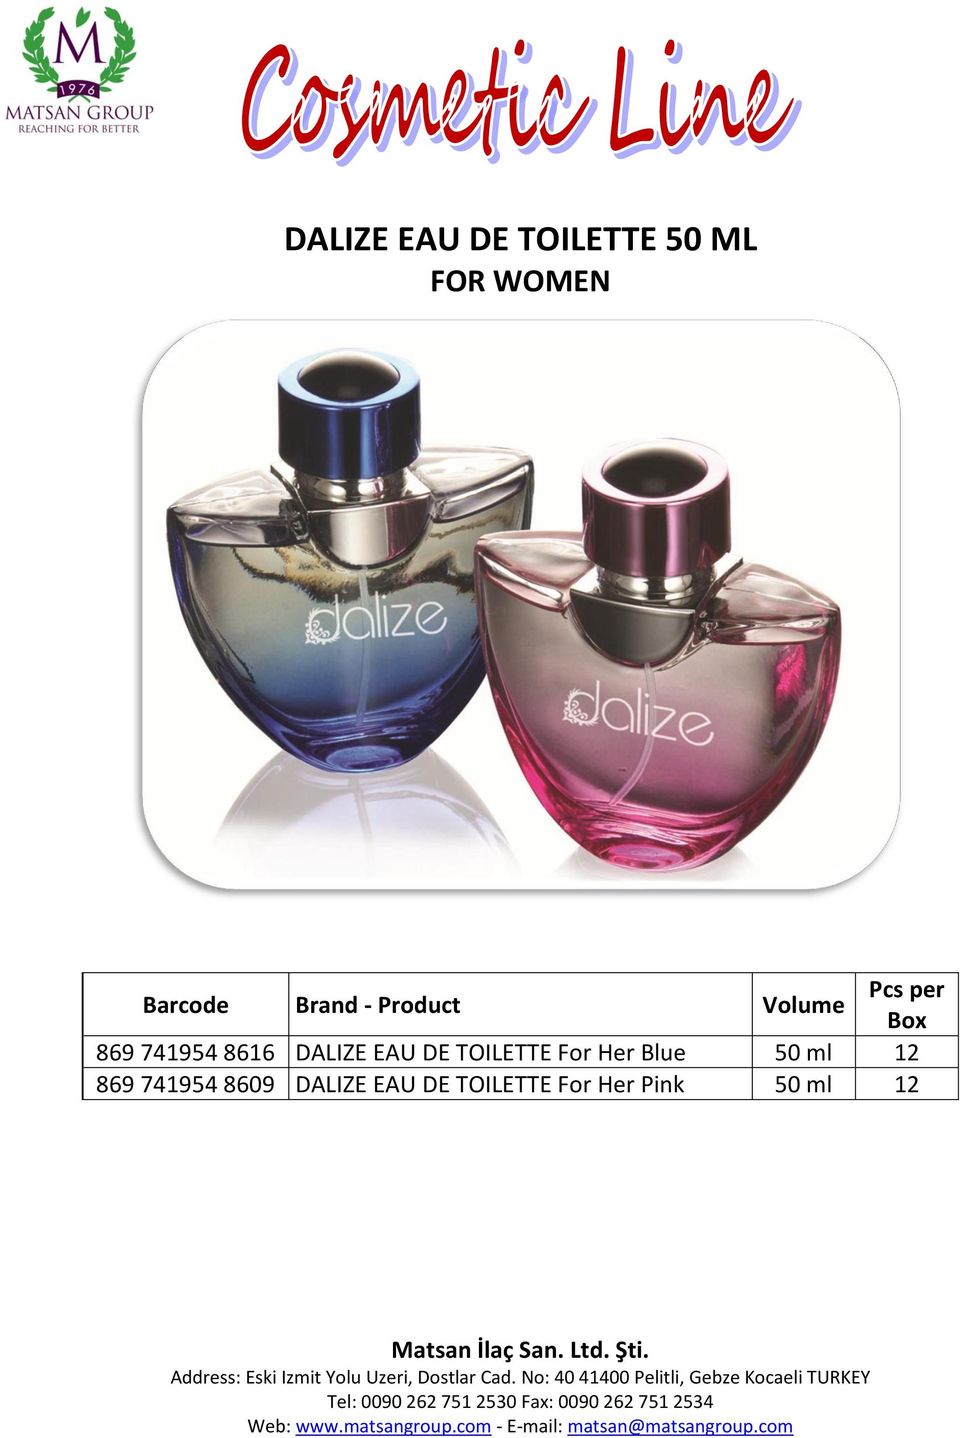 For Her Blue 50 ml 12 869 741954 8609